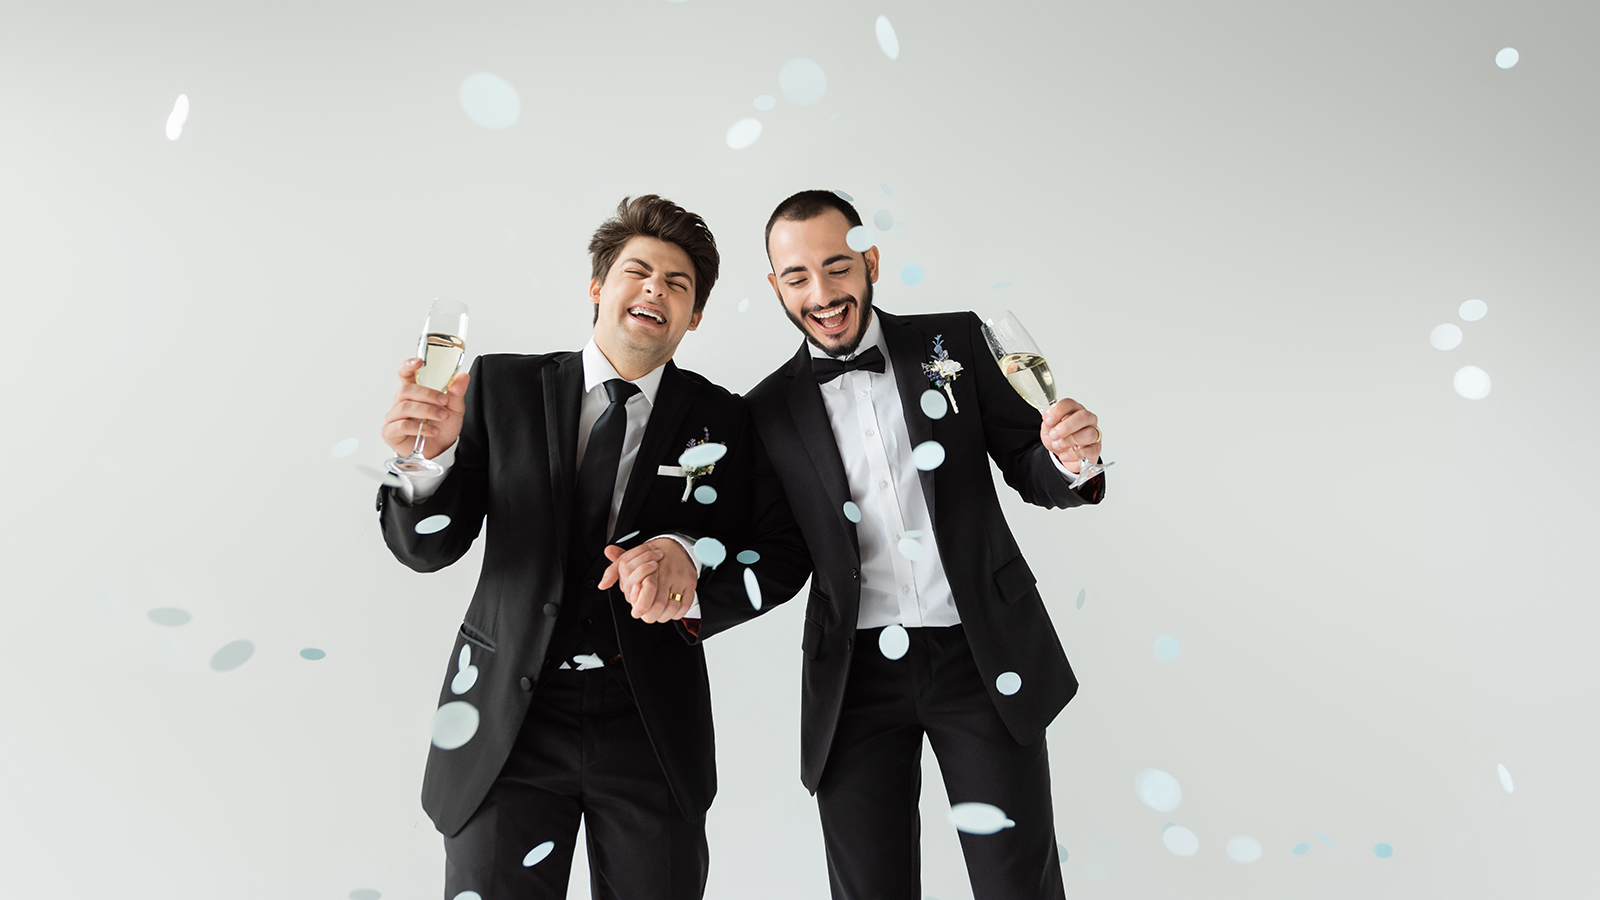 Excited homosexual grooms in elegant formal wear holding hands and glasses of champagne while standing under falling confetti during wedding on grey background